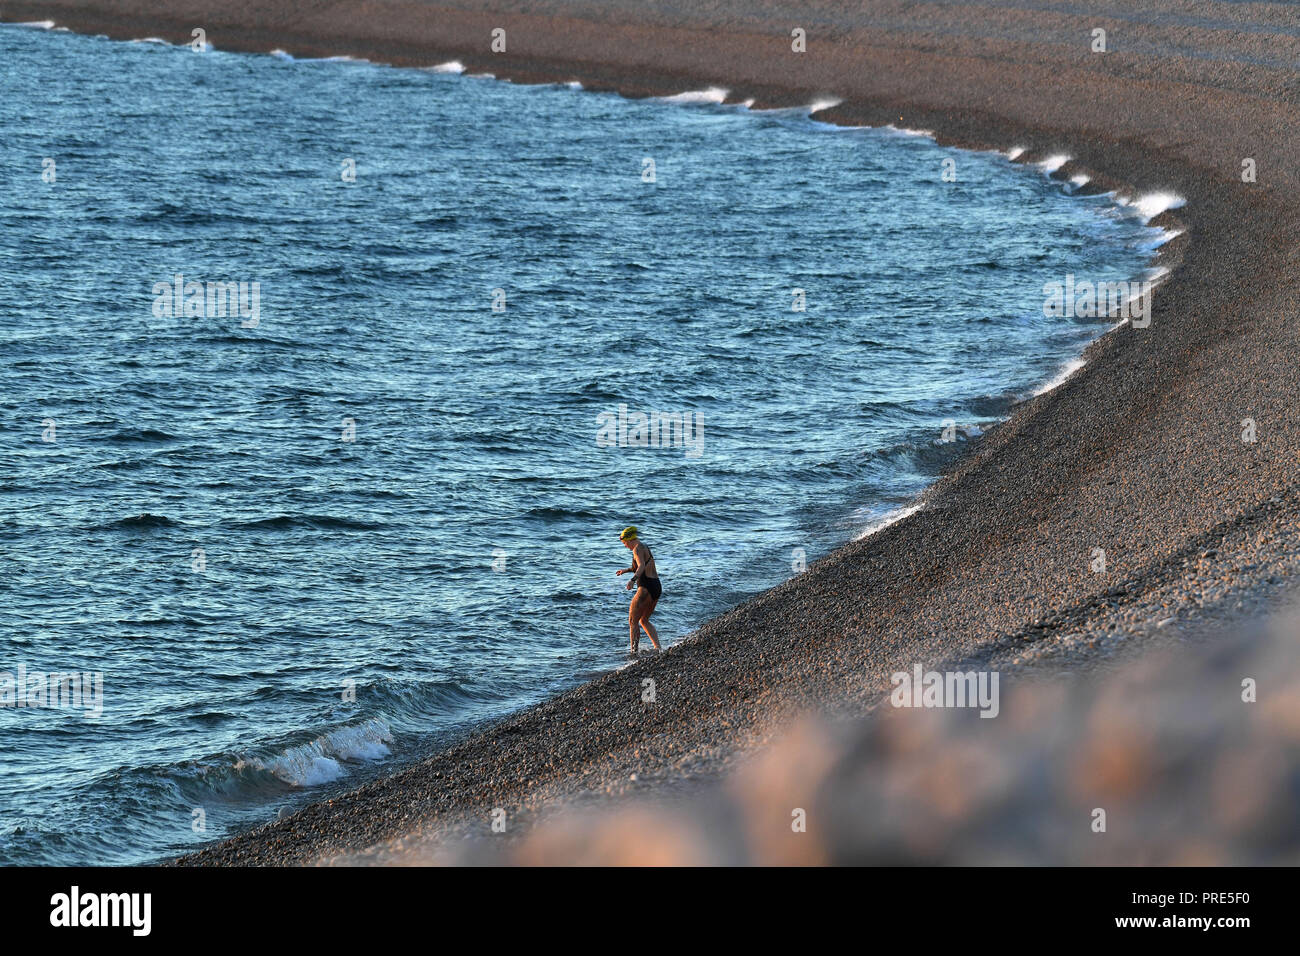 Portland, Dorset, UK. 1st Oct, 2018. Sun sets on Chesil Beach at Portland in Dorset, A swimmer takes to the water at sunset on Chesil beach, Portland, Dorset Credit: Finnbarr Webster/Alamy Live News Stock Photo